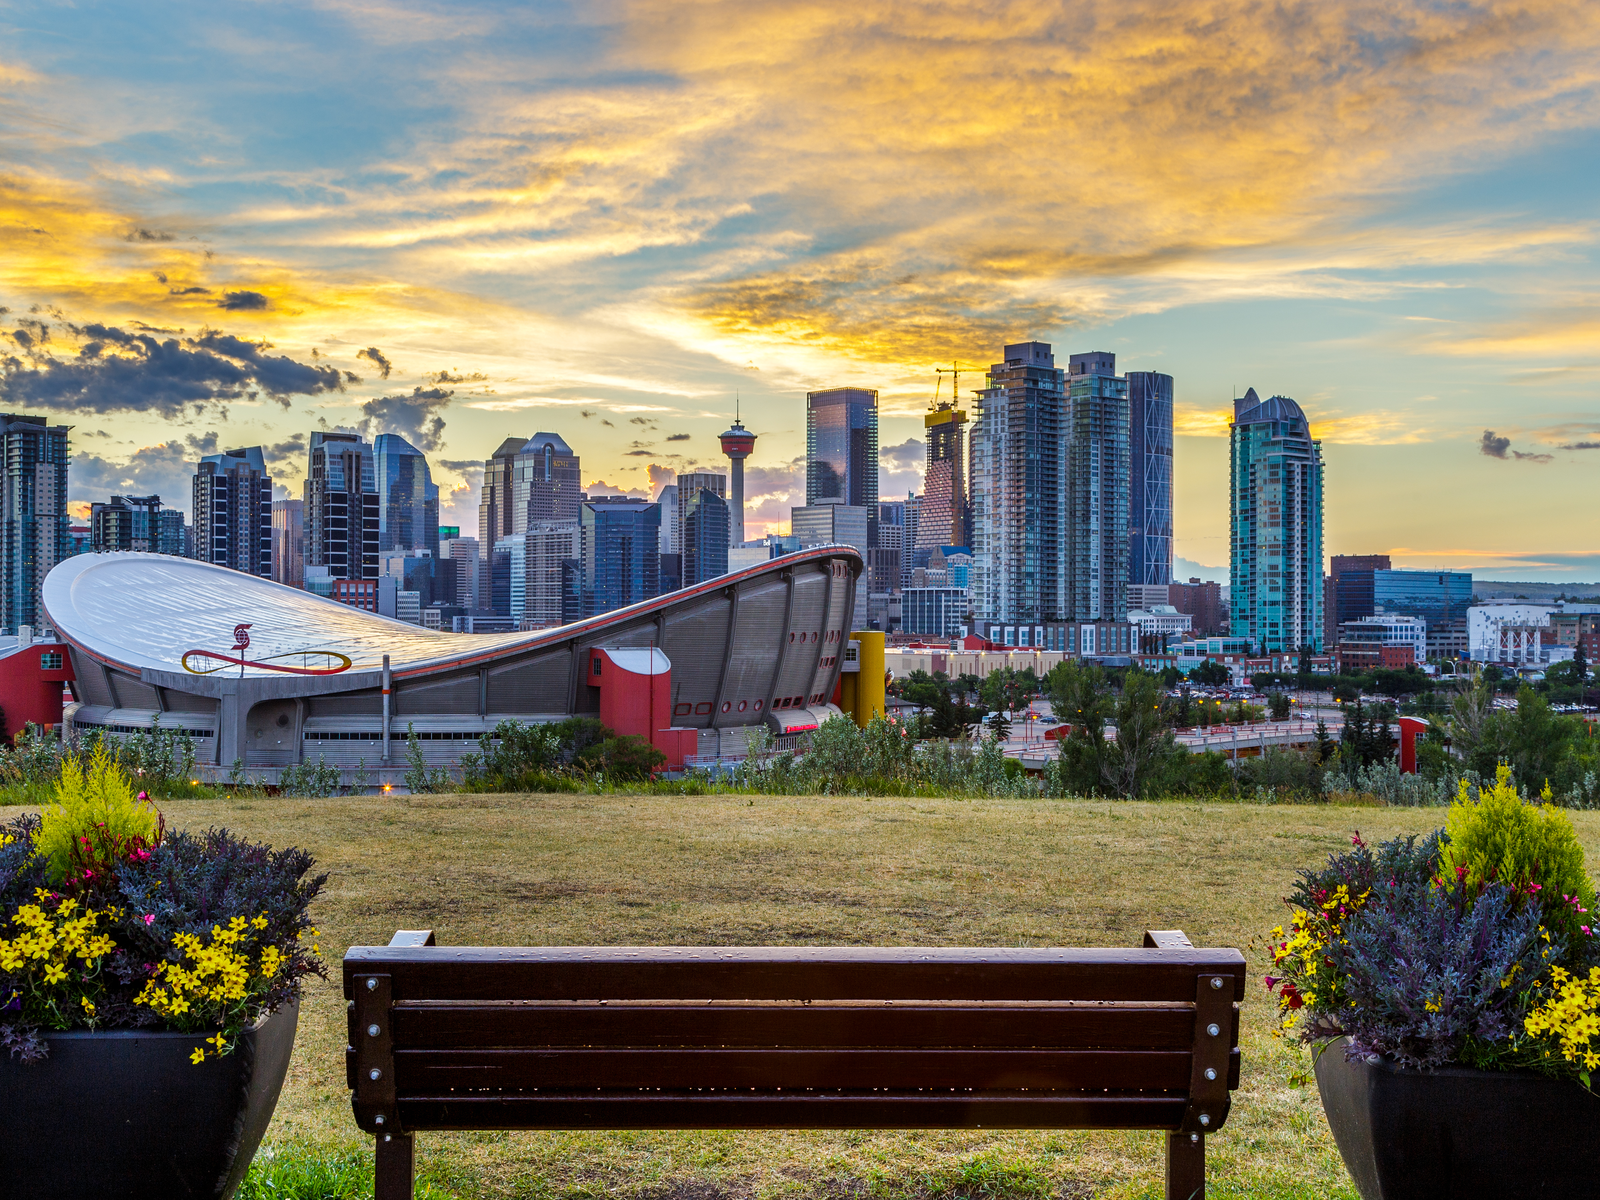 A lonely bench, sitting in between two large pots of plants, fronting Calgary City Skyline, one of the best places to visit in Canada, on a magnificent sunset